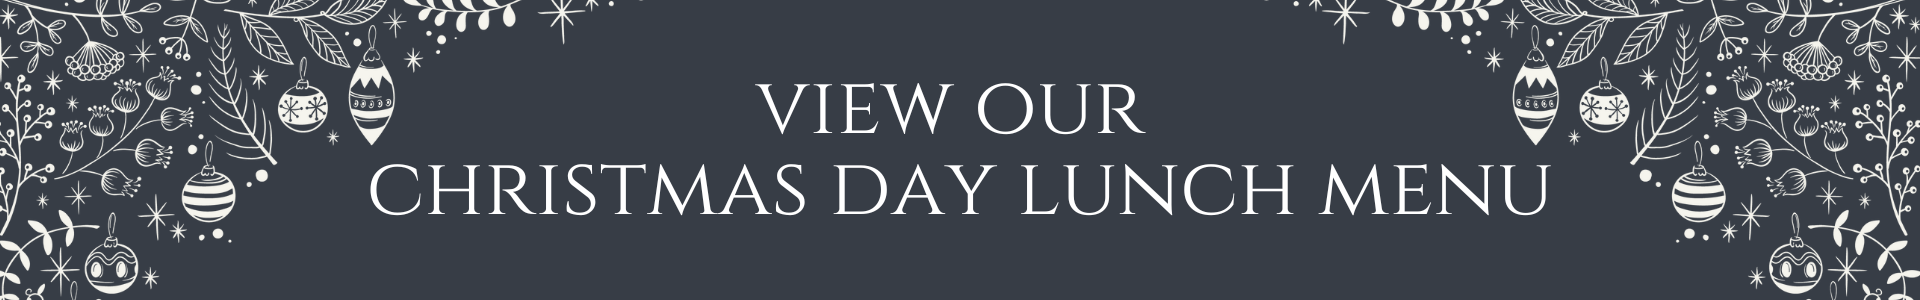 View our christmas day lunch menu